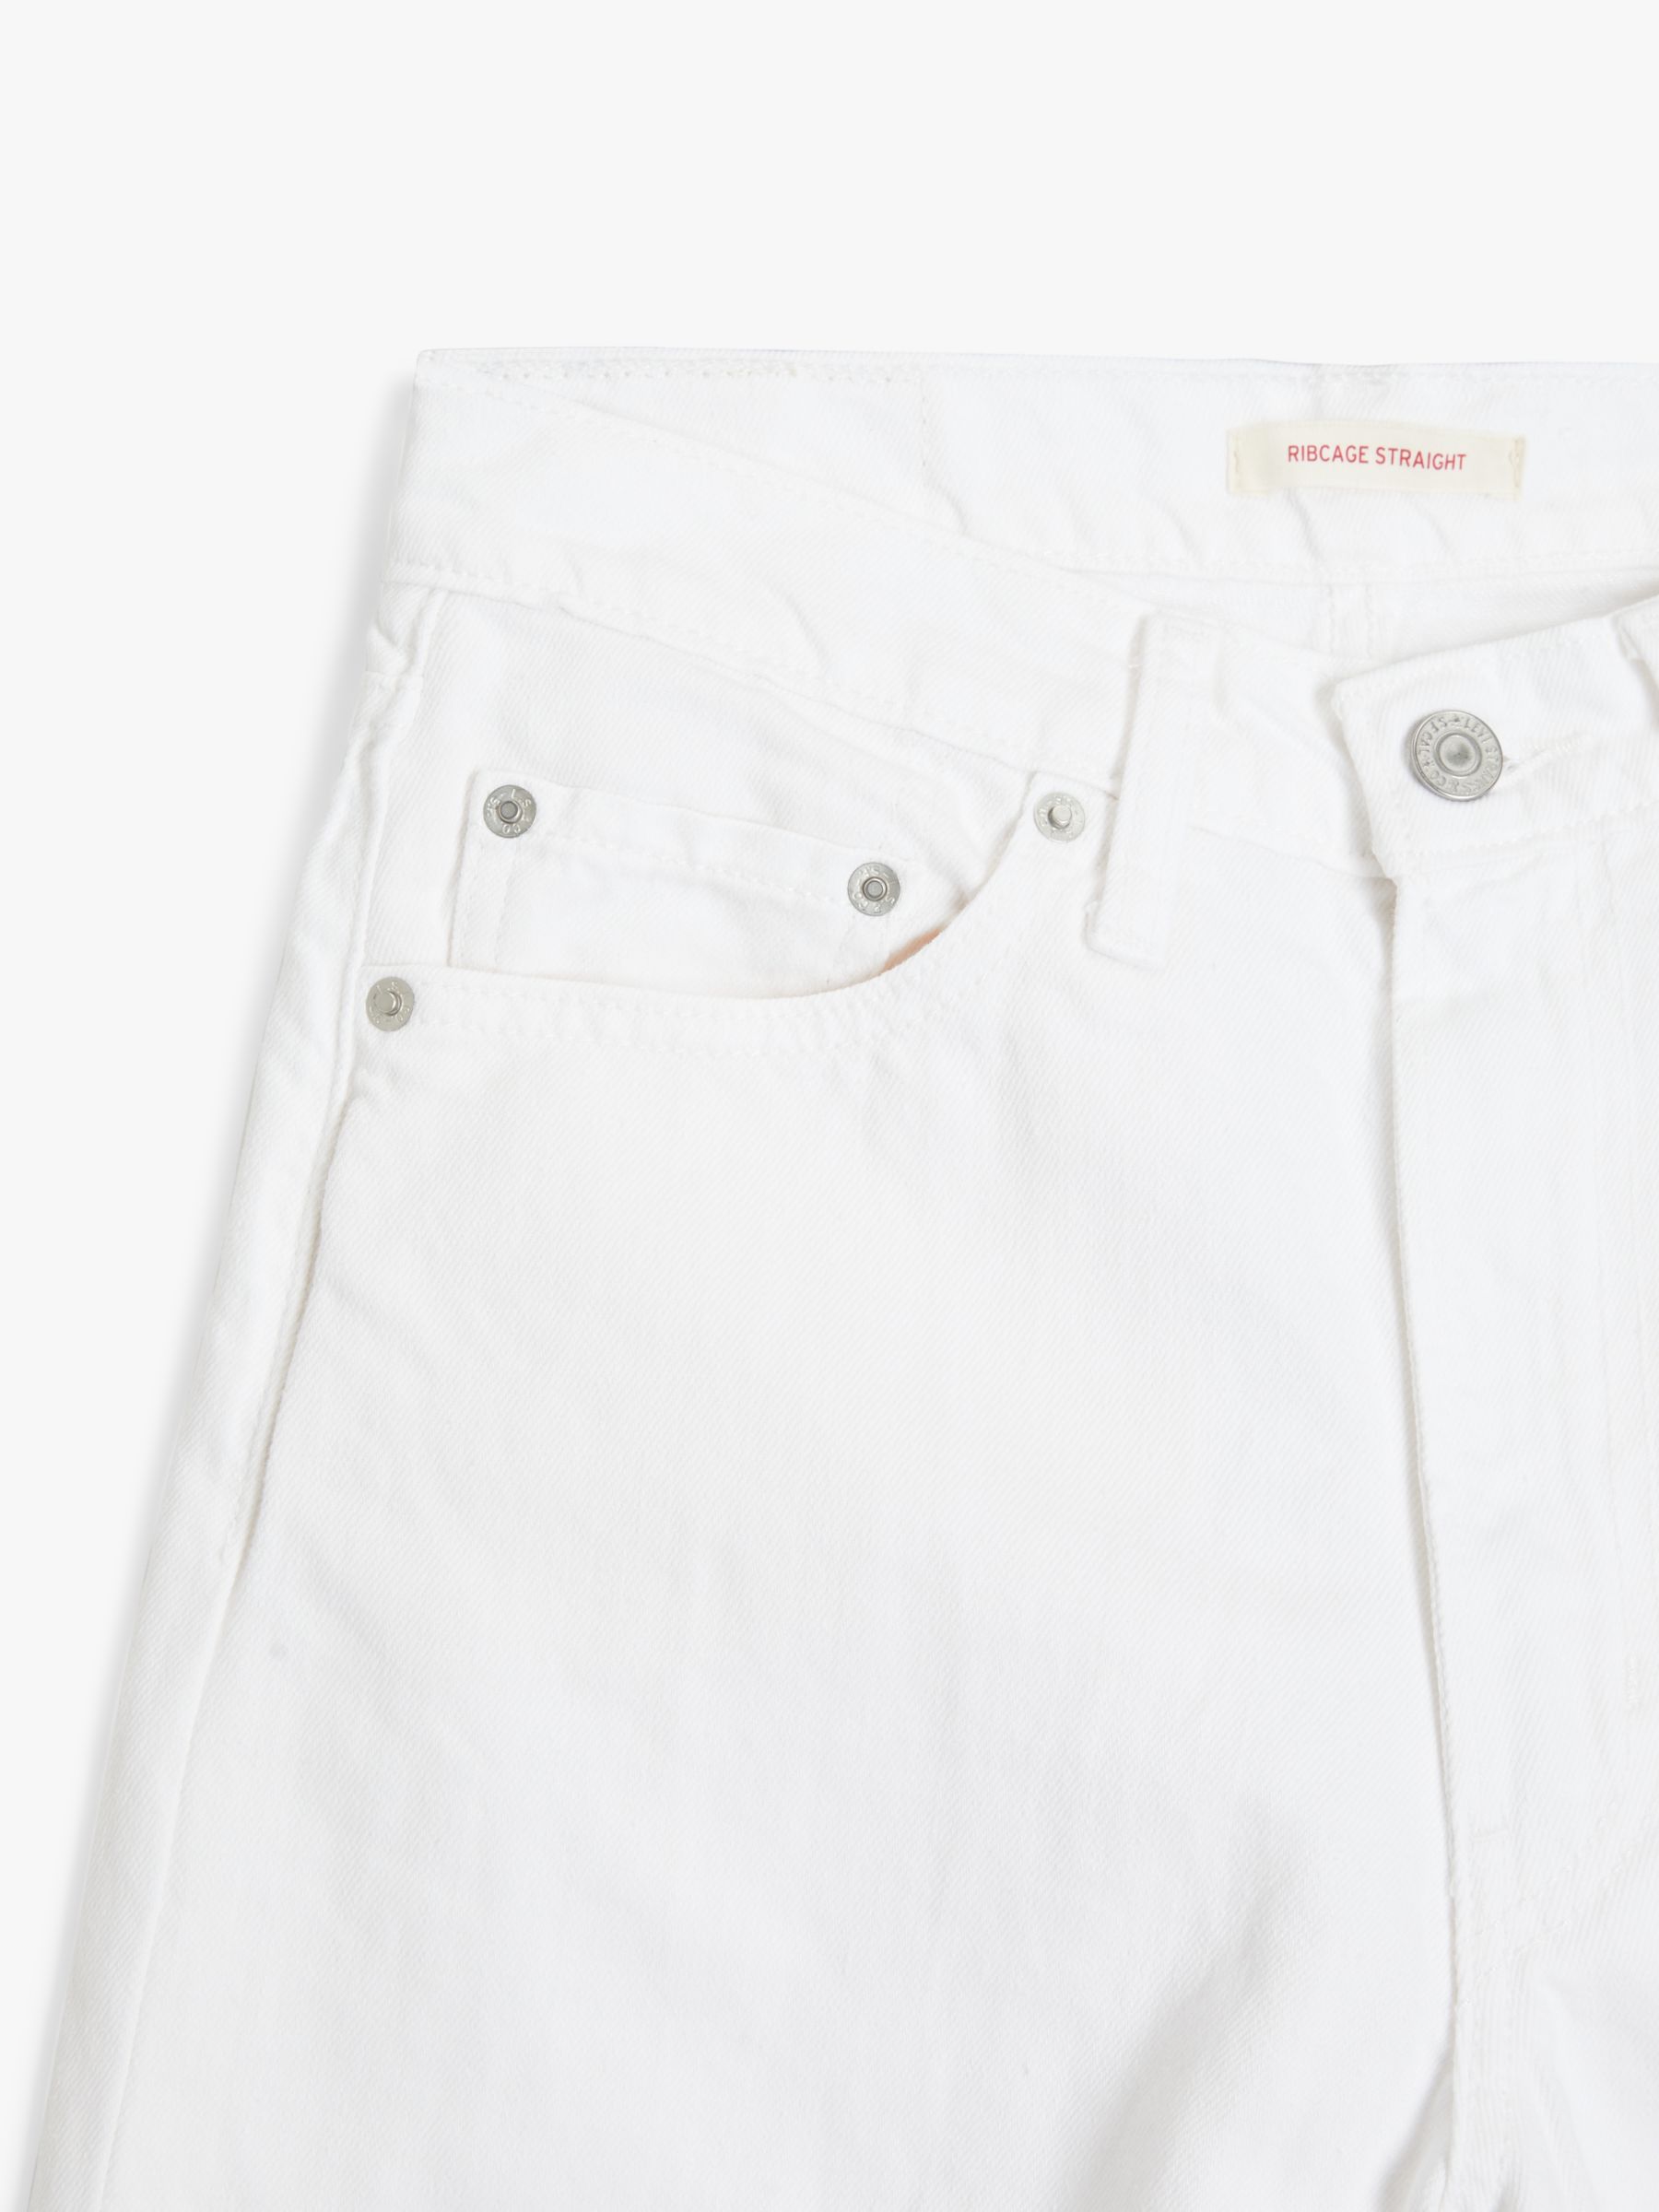 Levi's WellThread Ribcage Straight Ankle Jeans, White